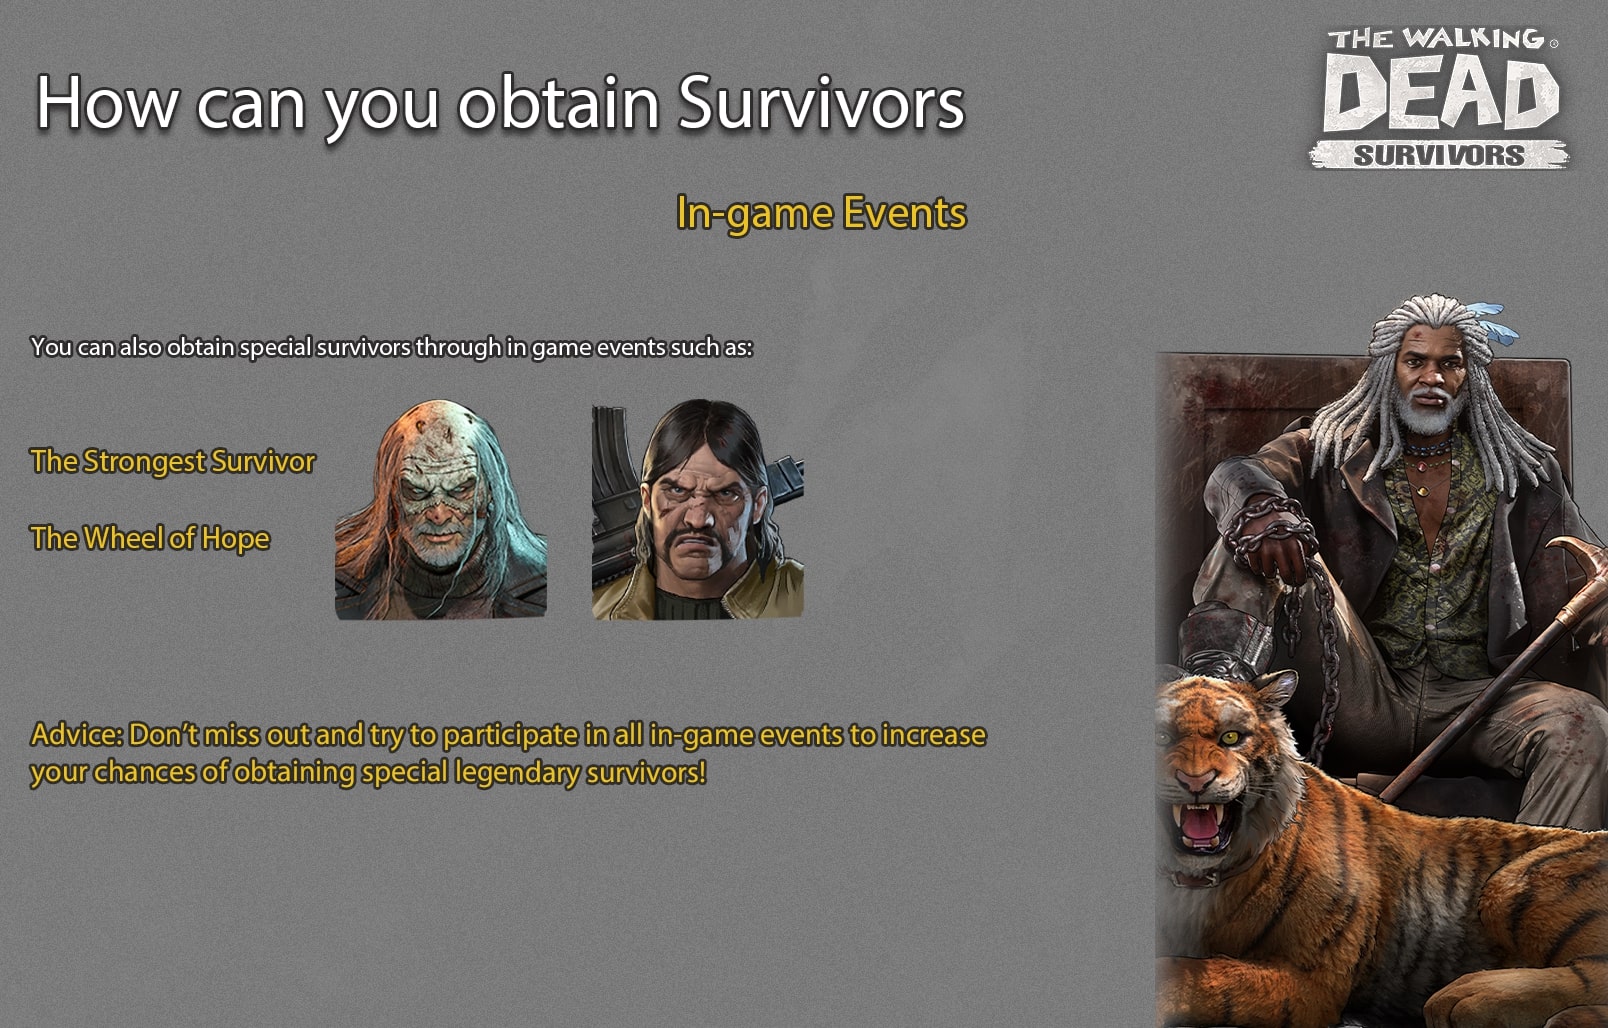 How_to_obtain_survivers_2.jpg